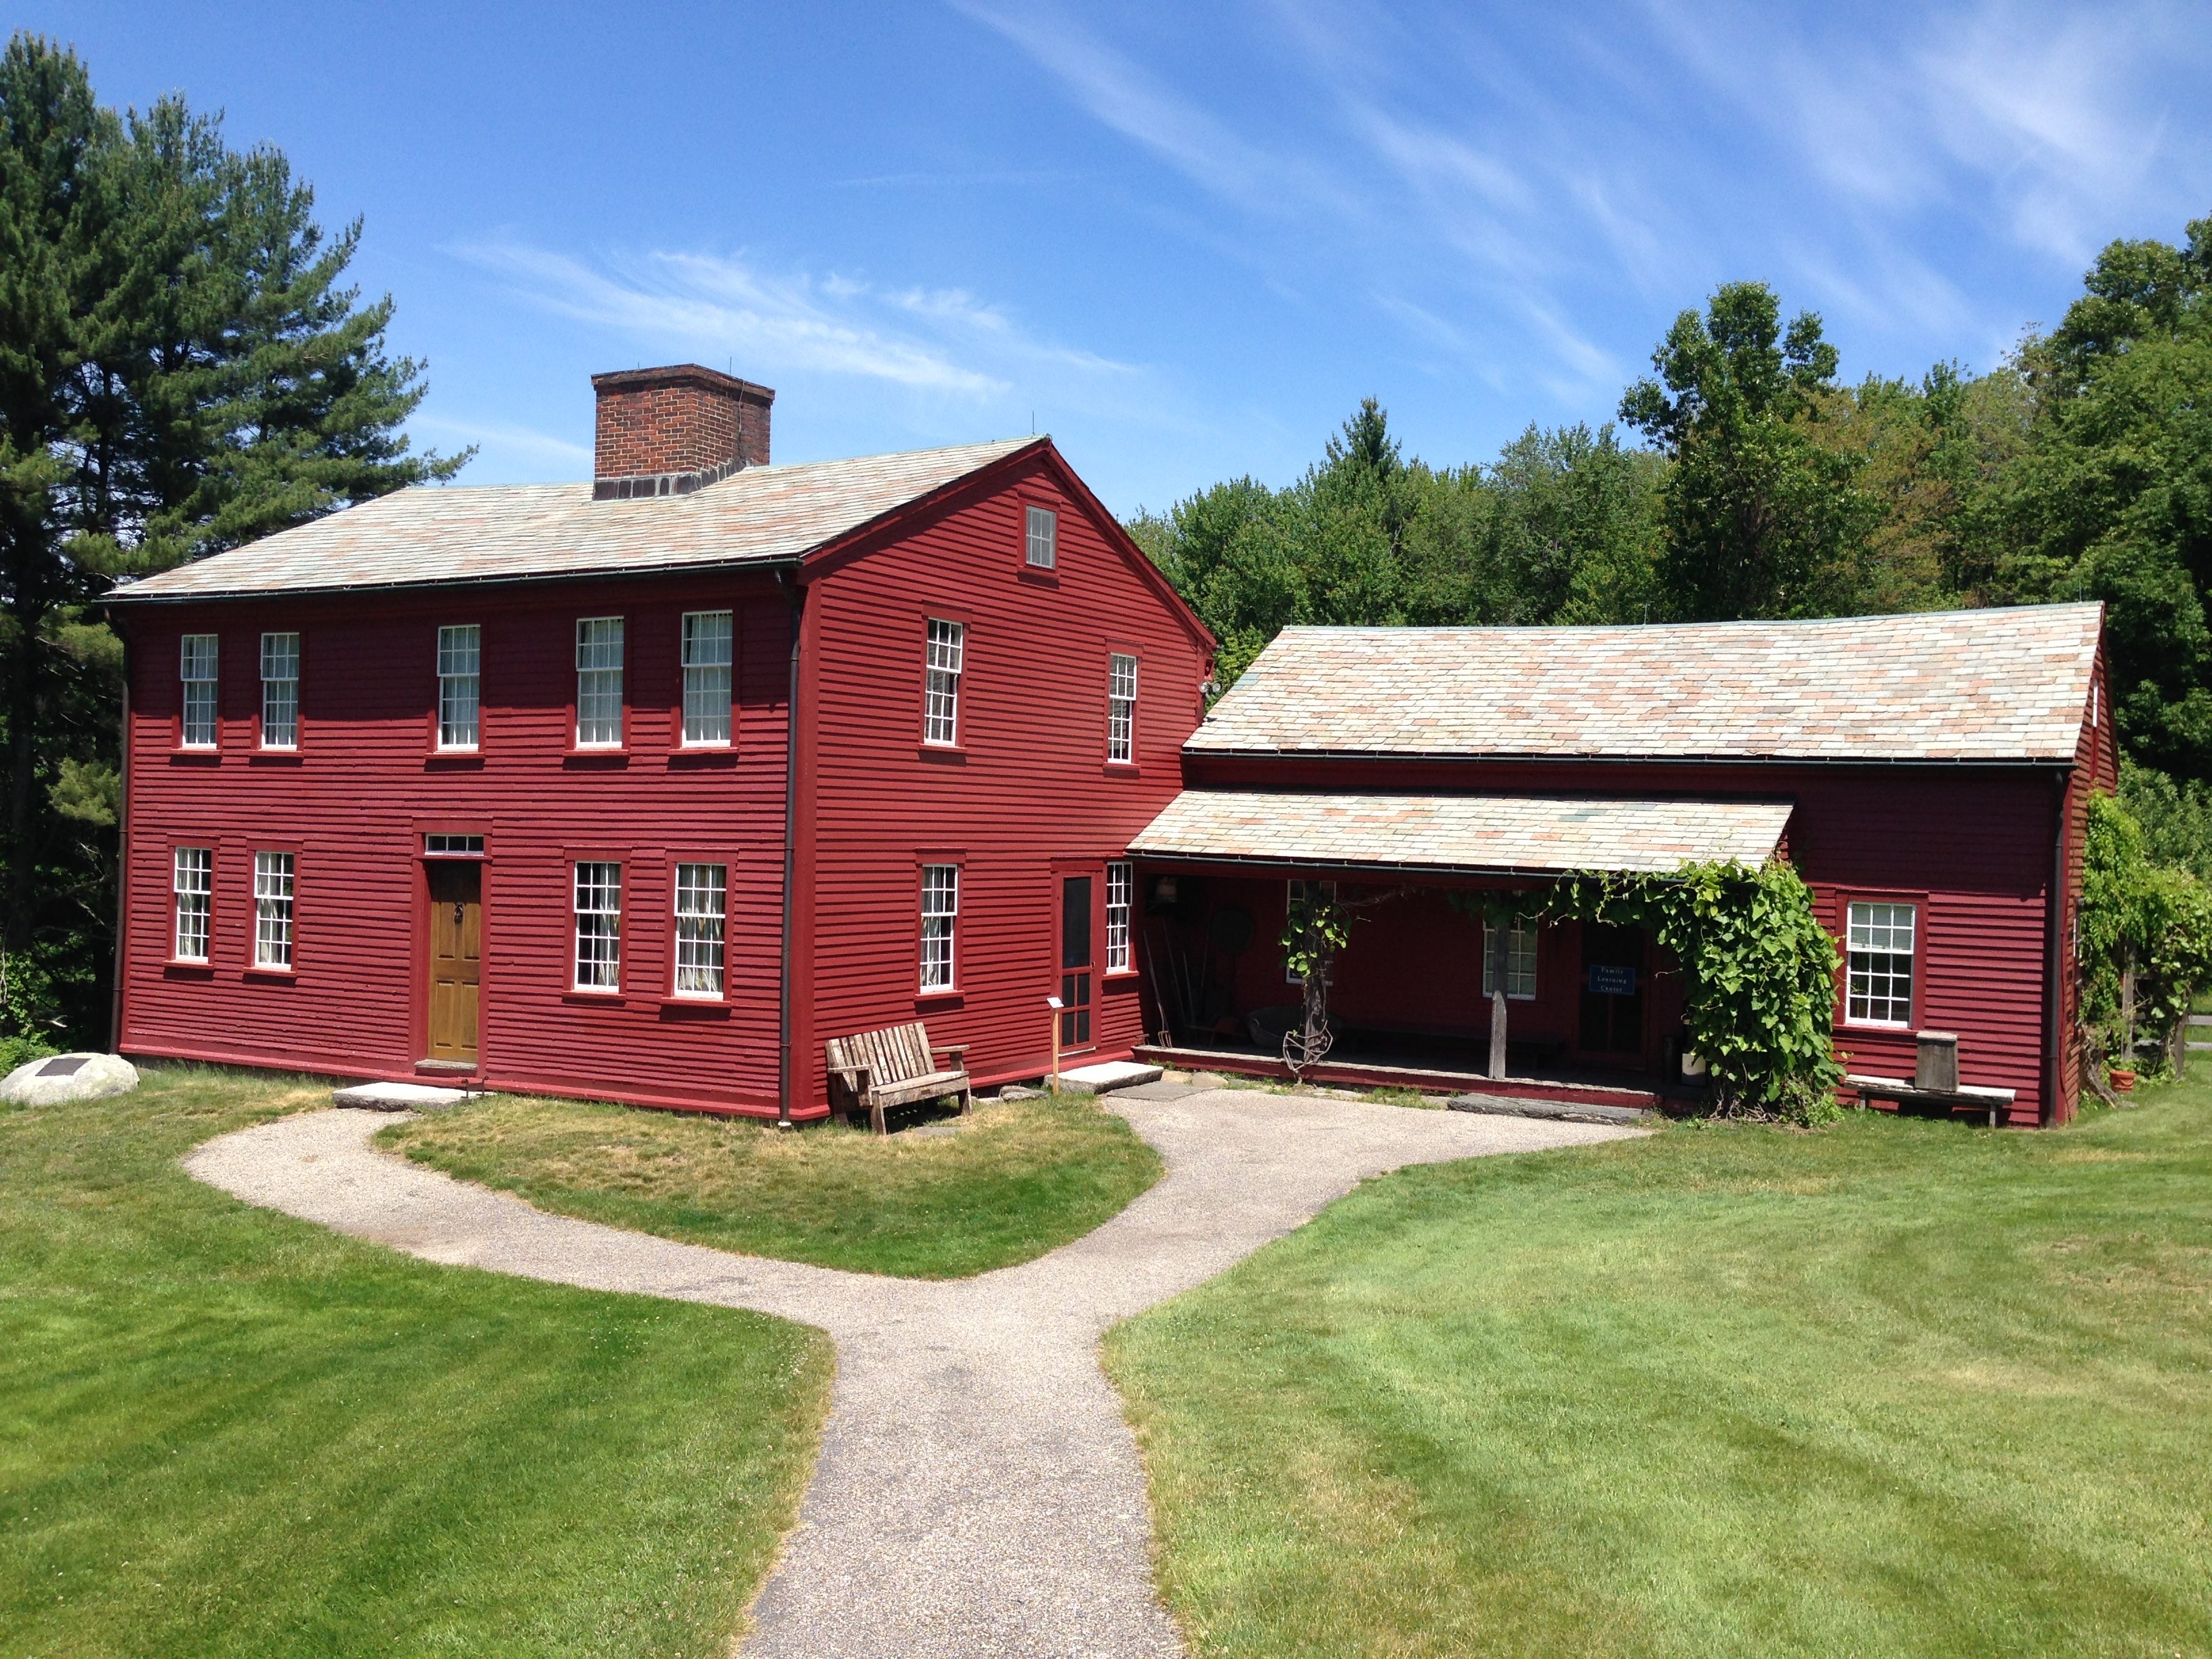 Today, the buildings at Fruitlands are now a museum.